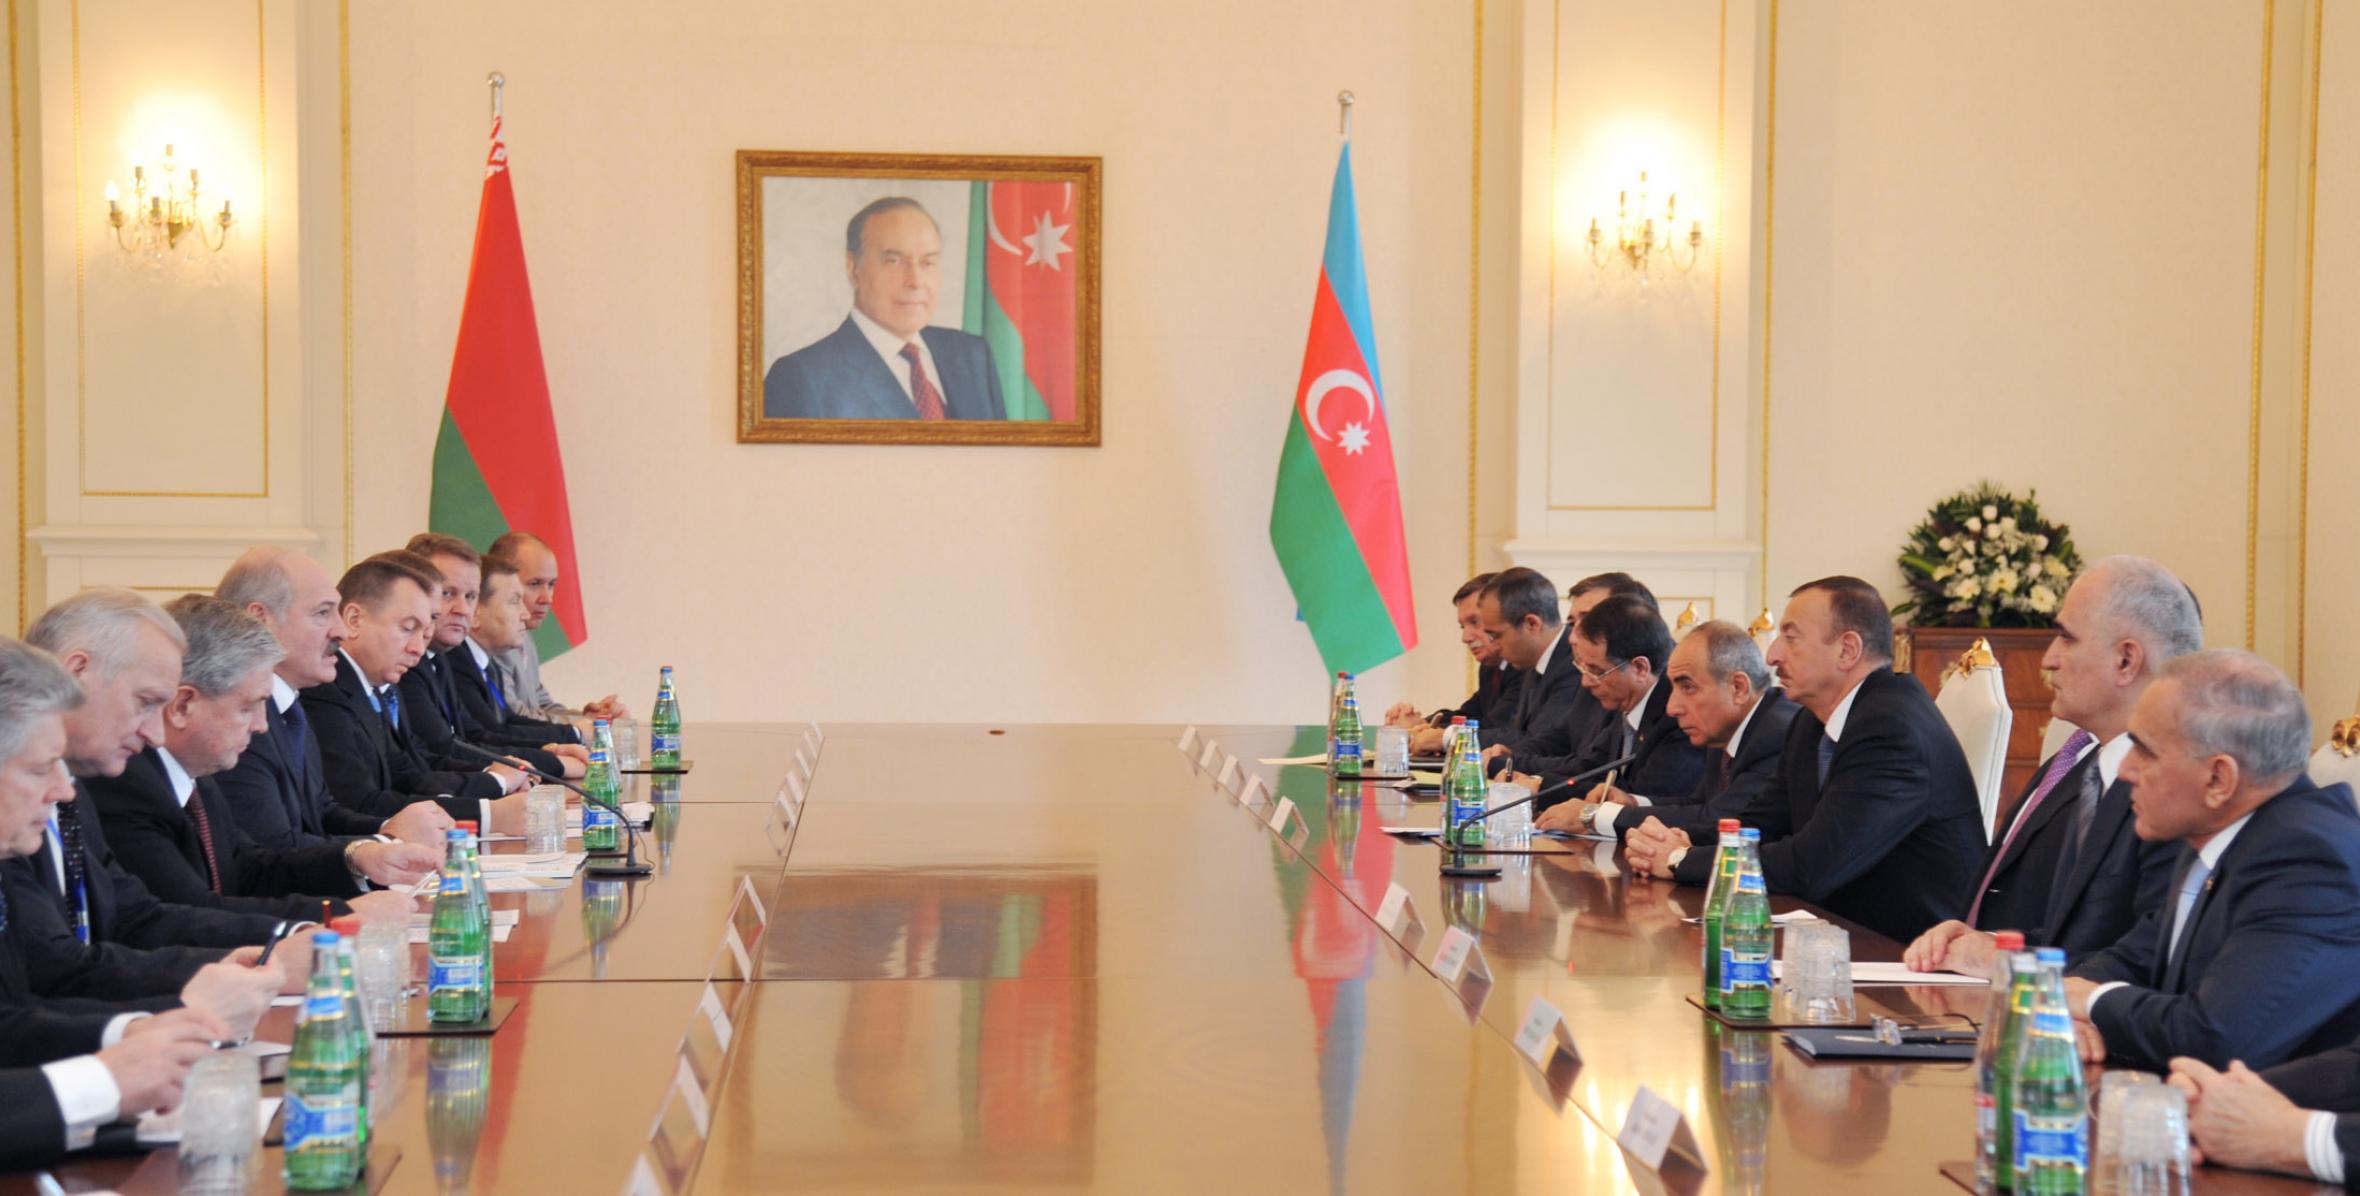 The Presidents of Azerbaijan and Belarus had an expanded meeting